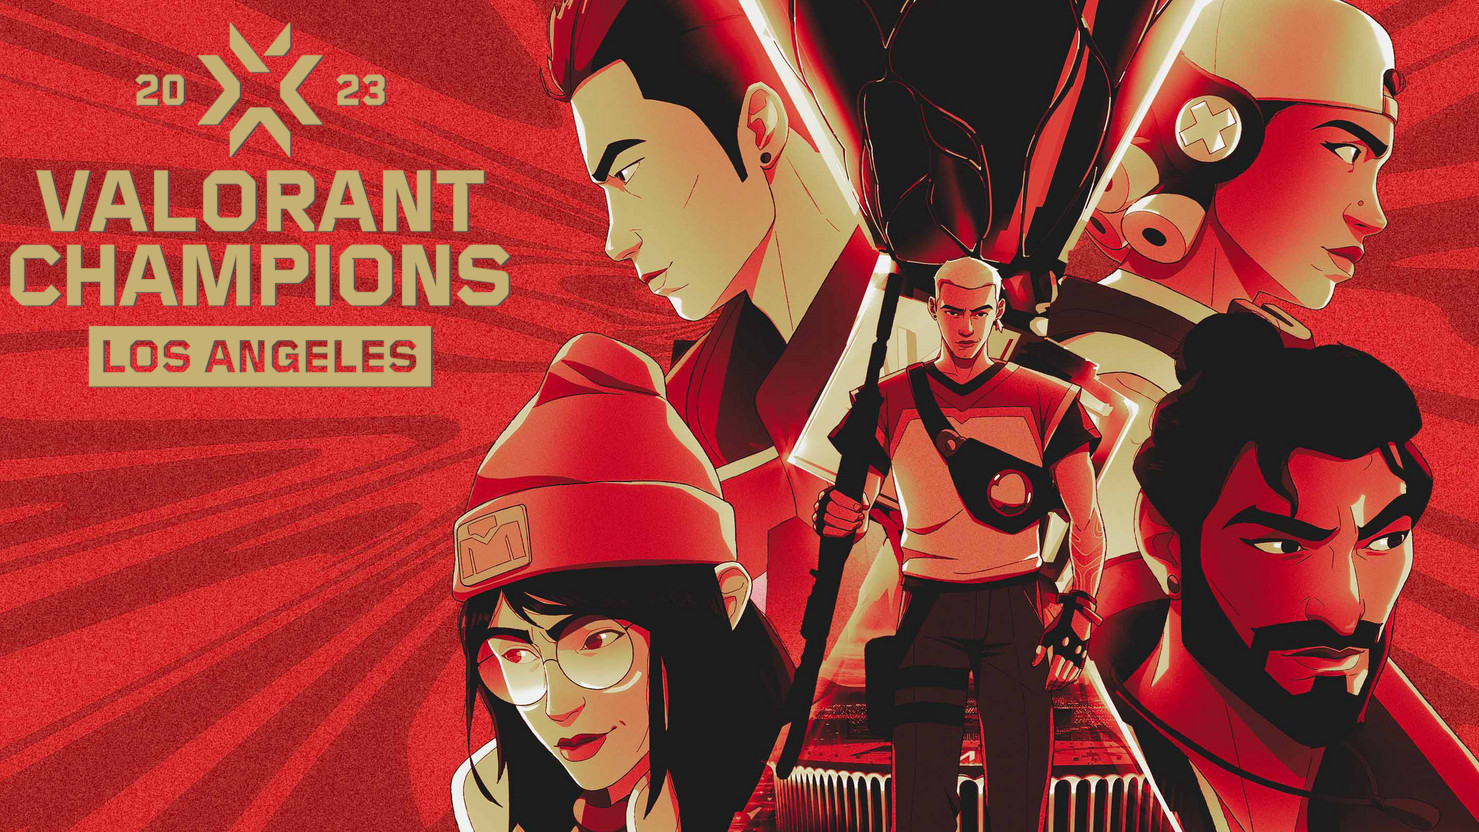 Amazon Prime Gaming celebrates the 2023 Valorant Champions with exclusive giveaways